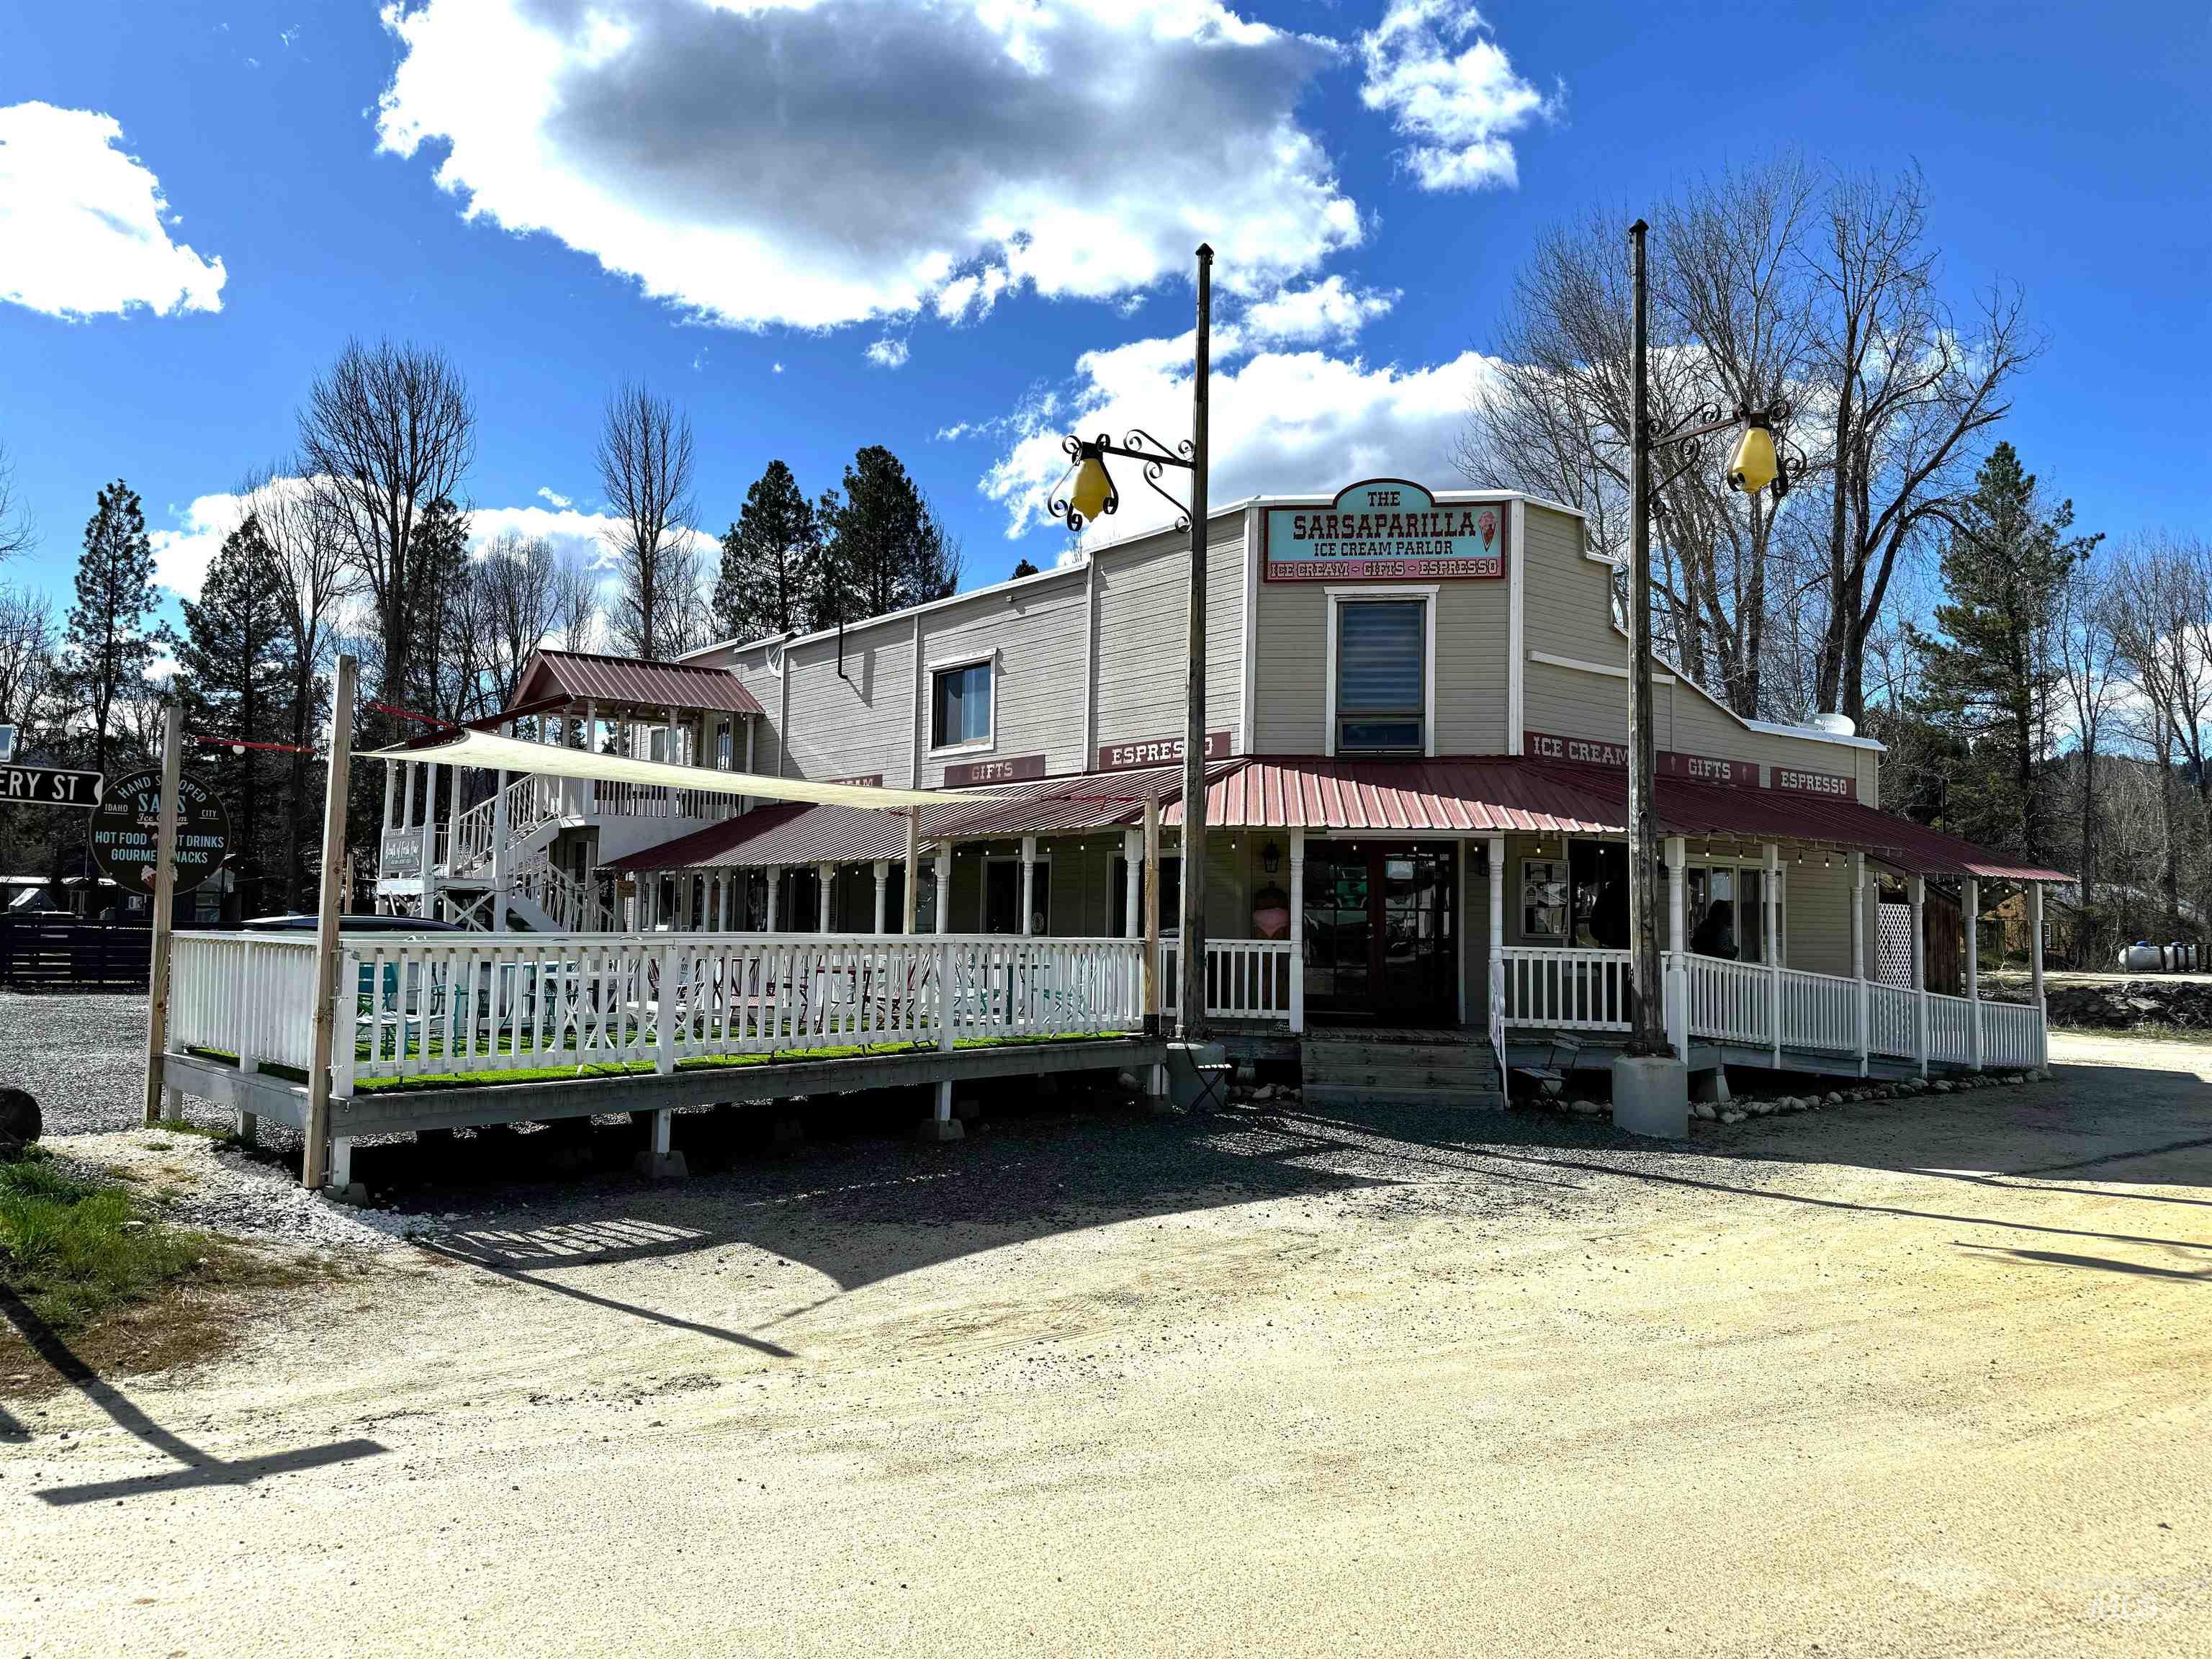 101 Montgomery Street, Idaho City, Idaho 83631, Business/Commercial For Sale, Price $770,000,MLS 98907823